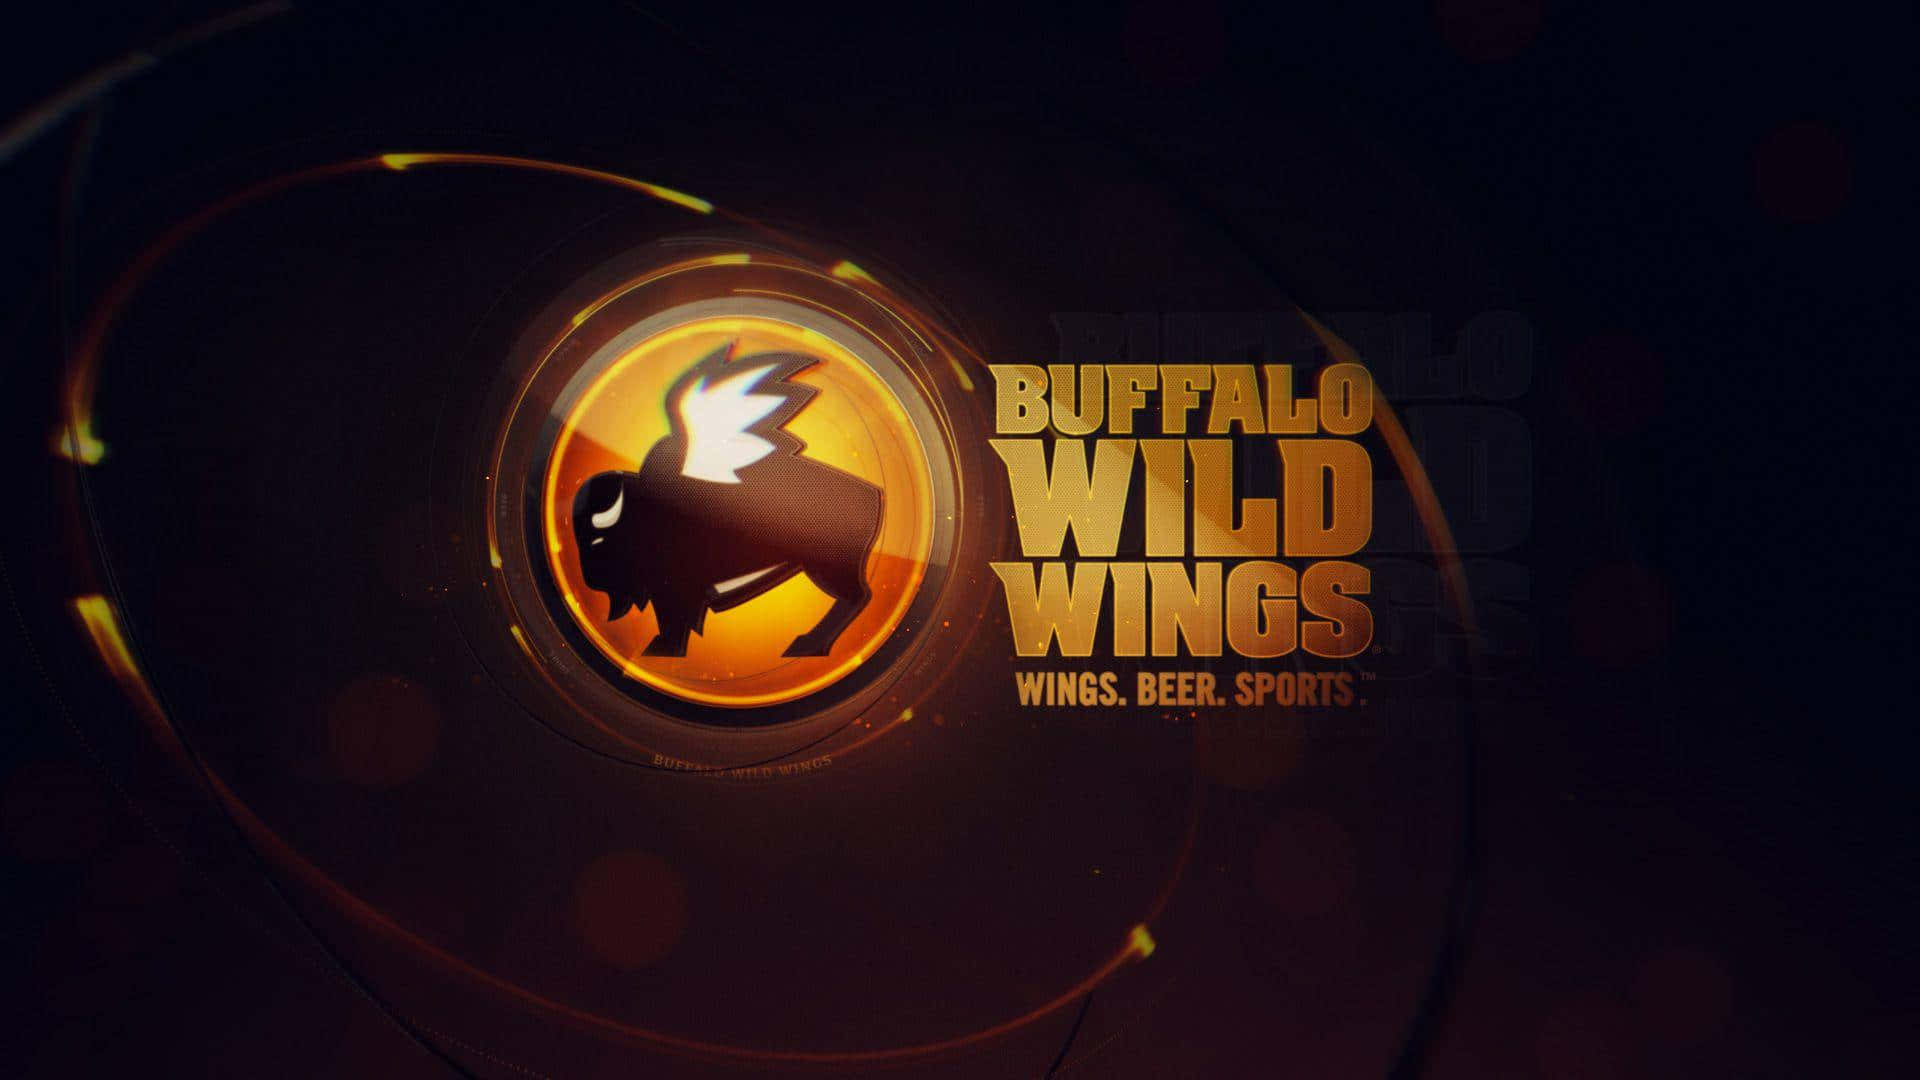 "Treat Yourself to a Delicious Wing&Beer Combo at Buffalo Wild Wings!"